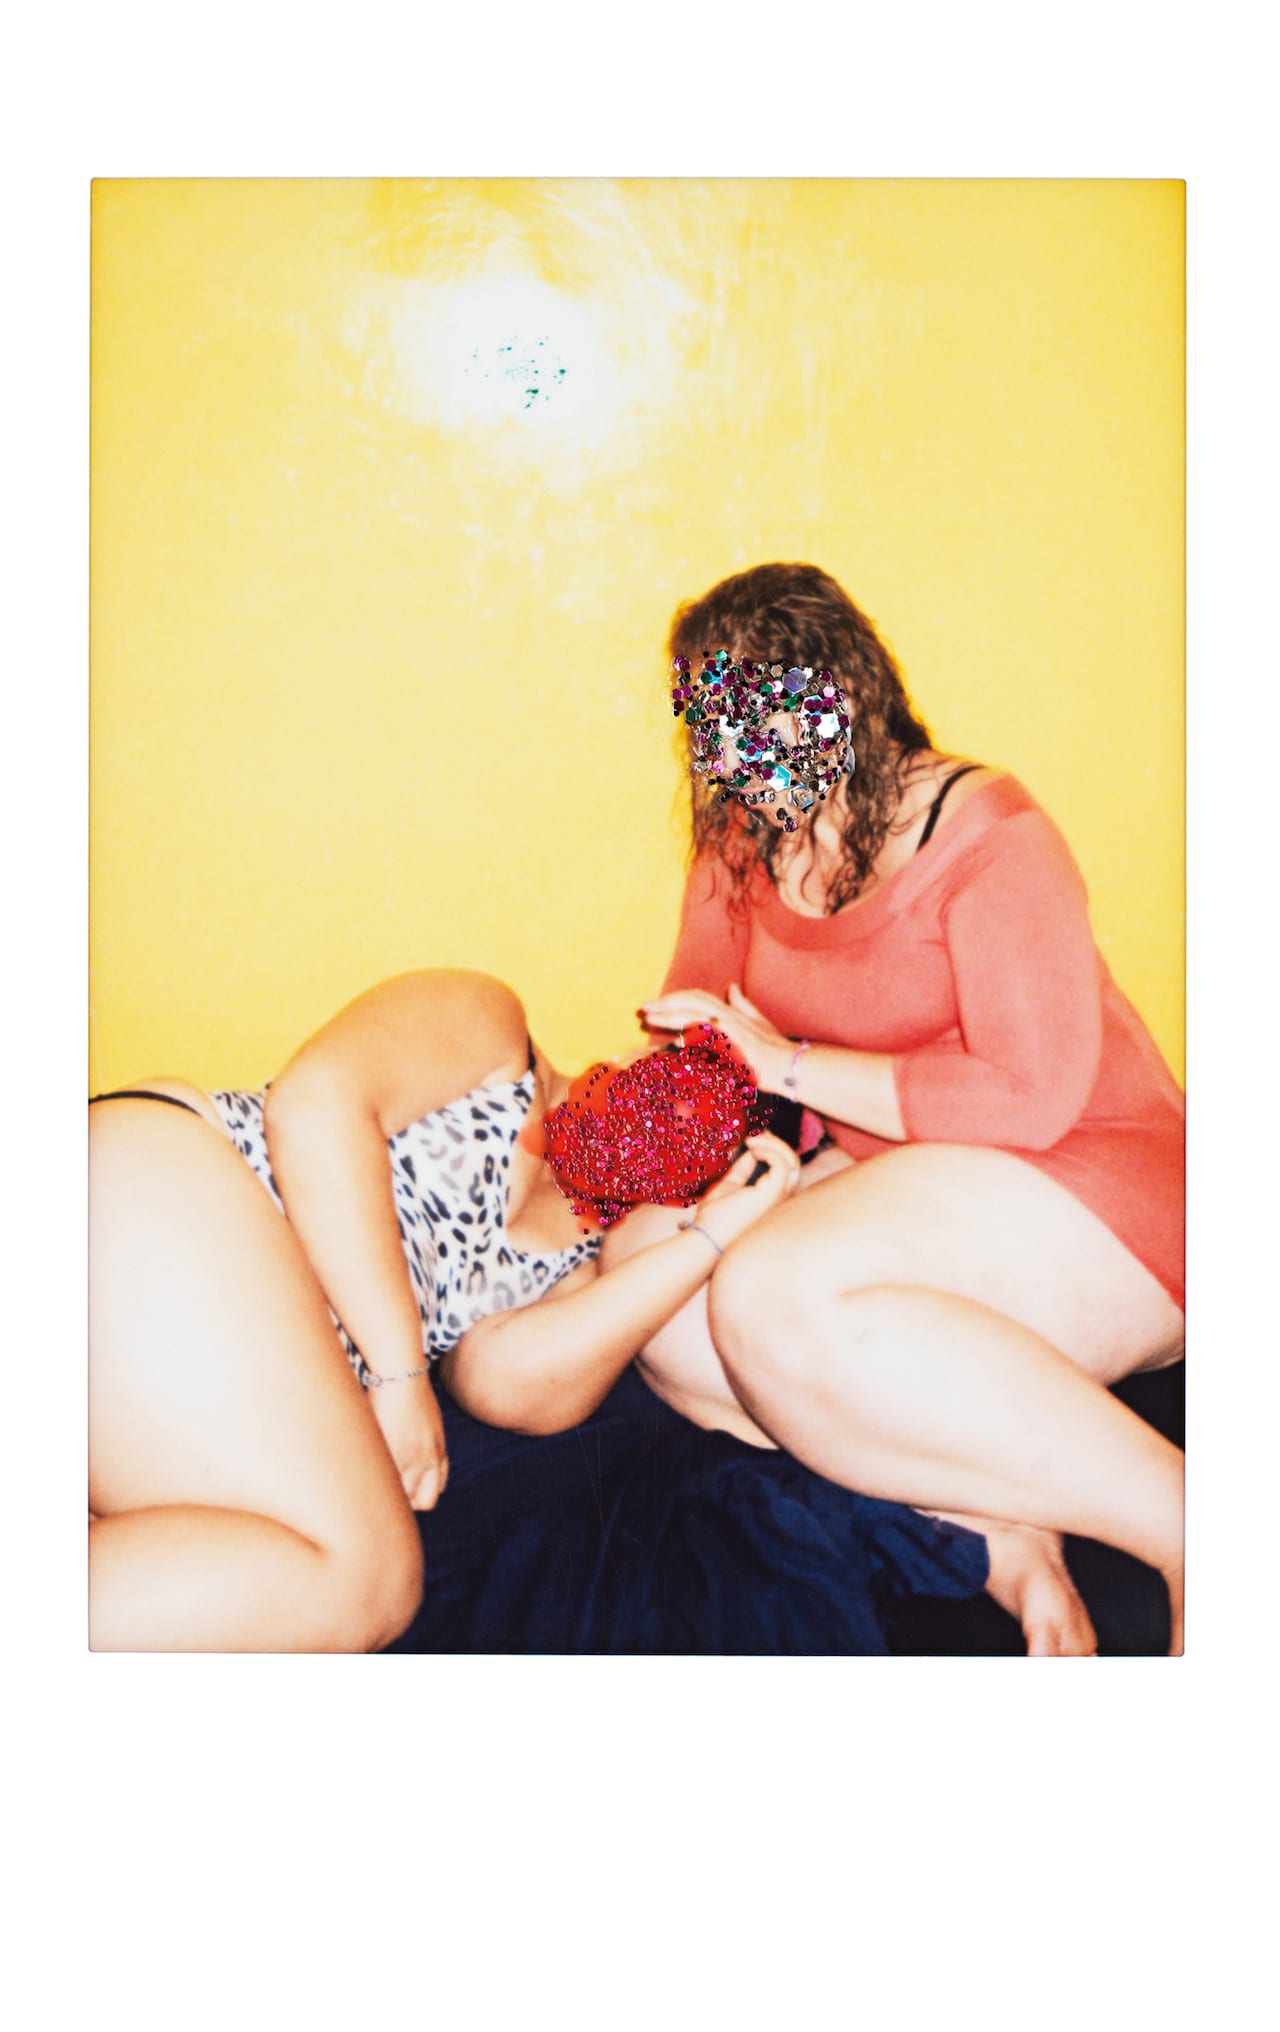 Nail polish and polaroids Charlotte Schmitz collaborates with sex workers  picture